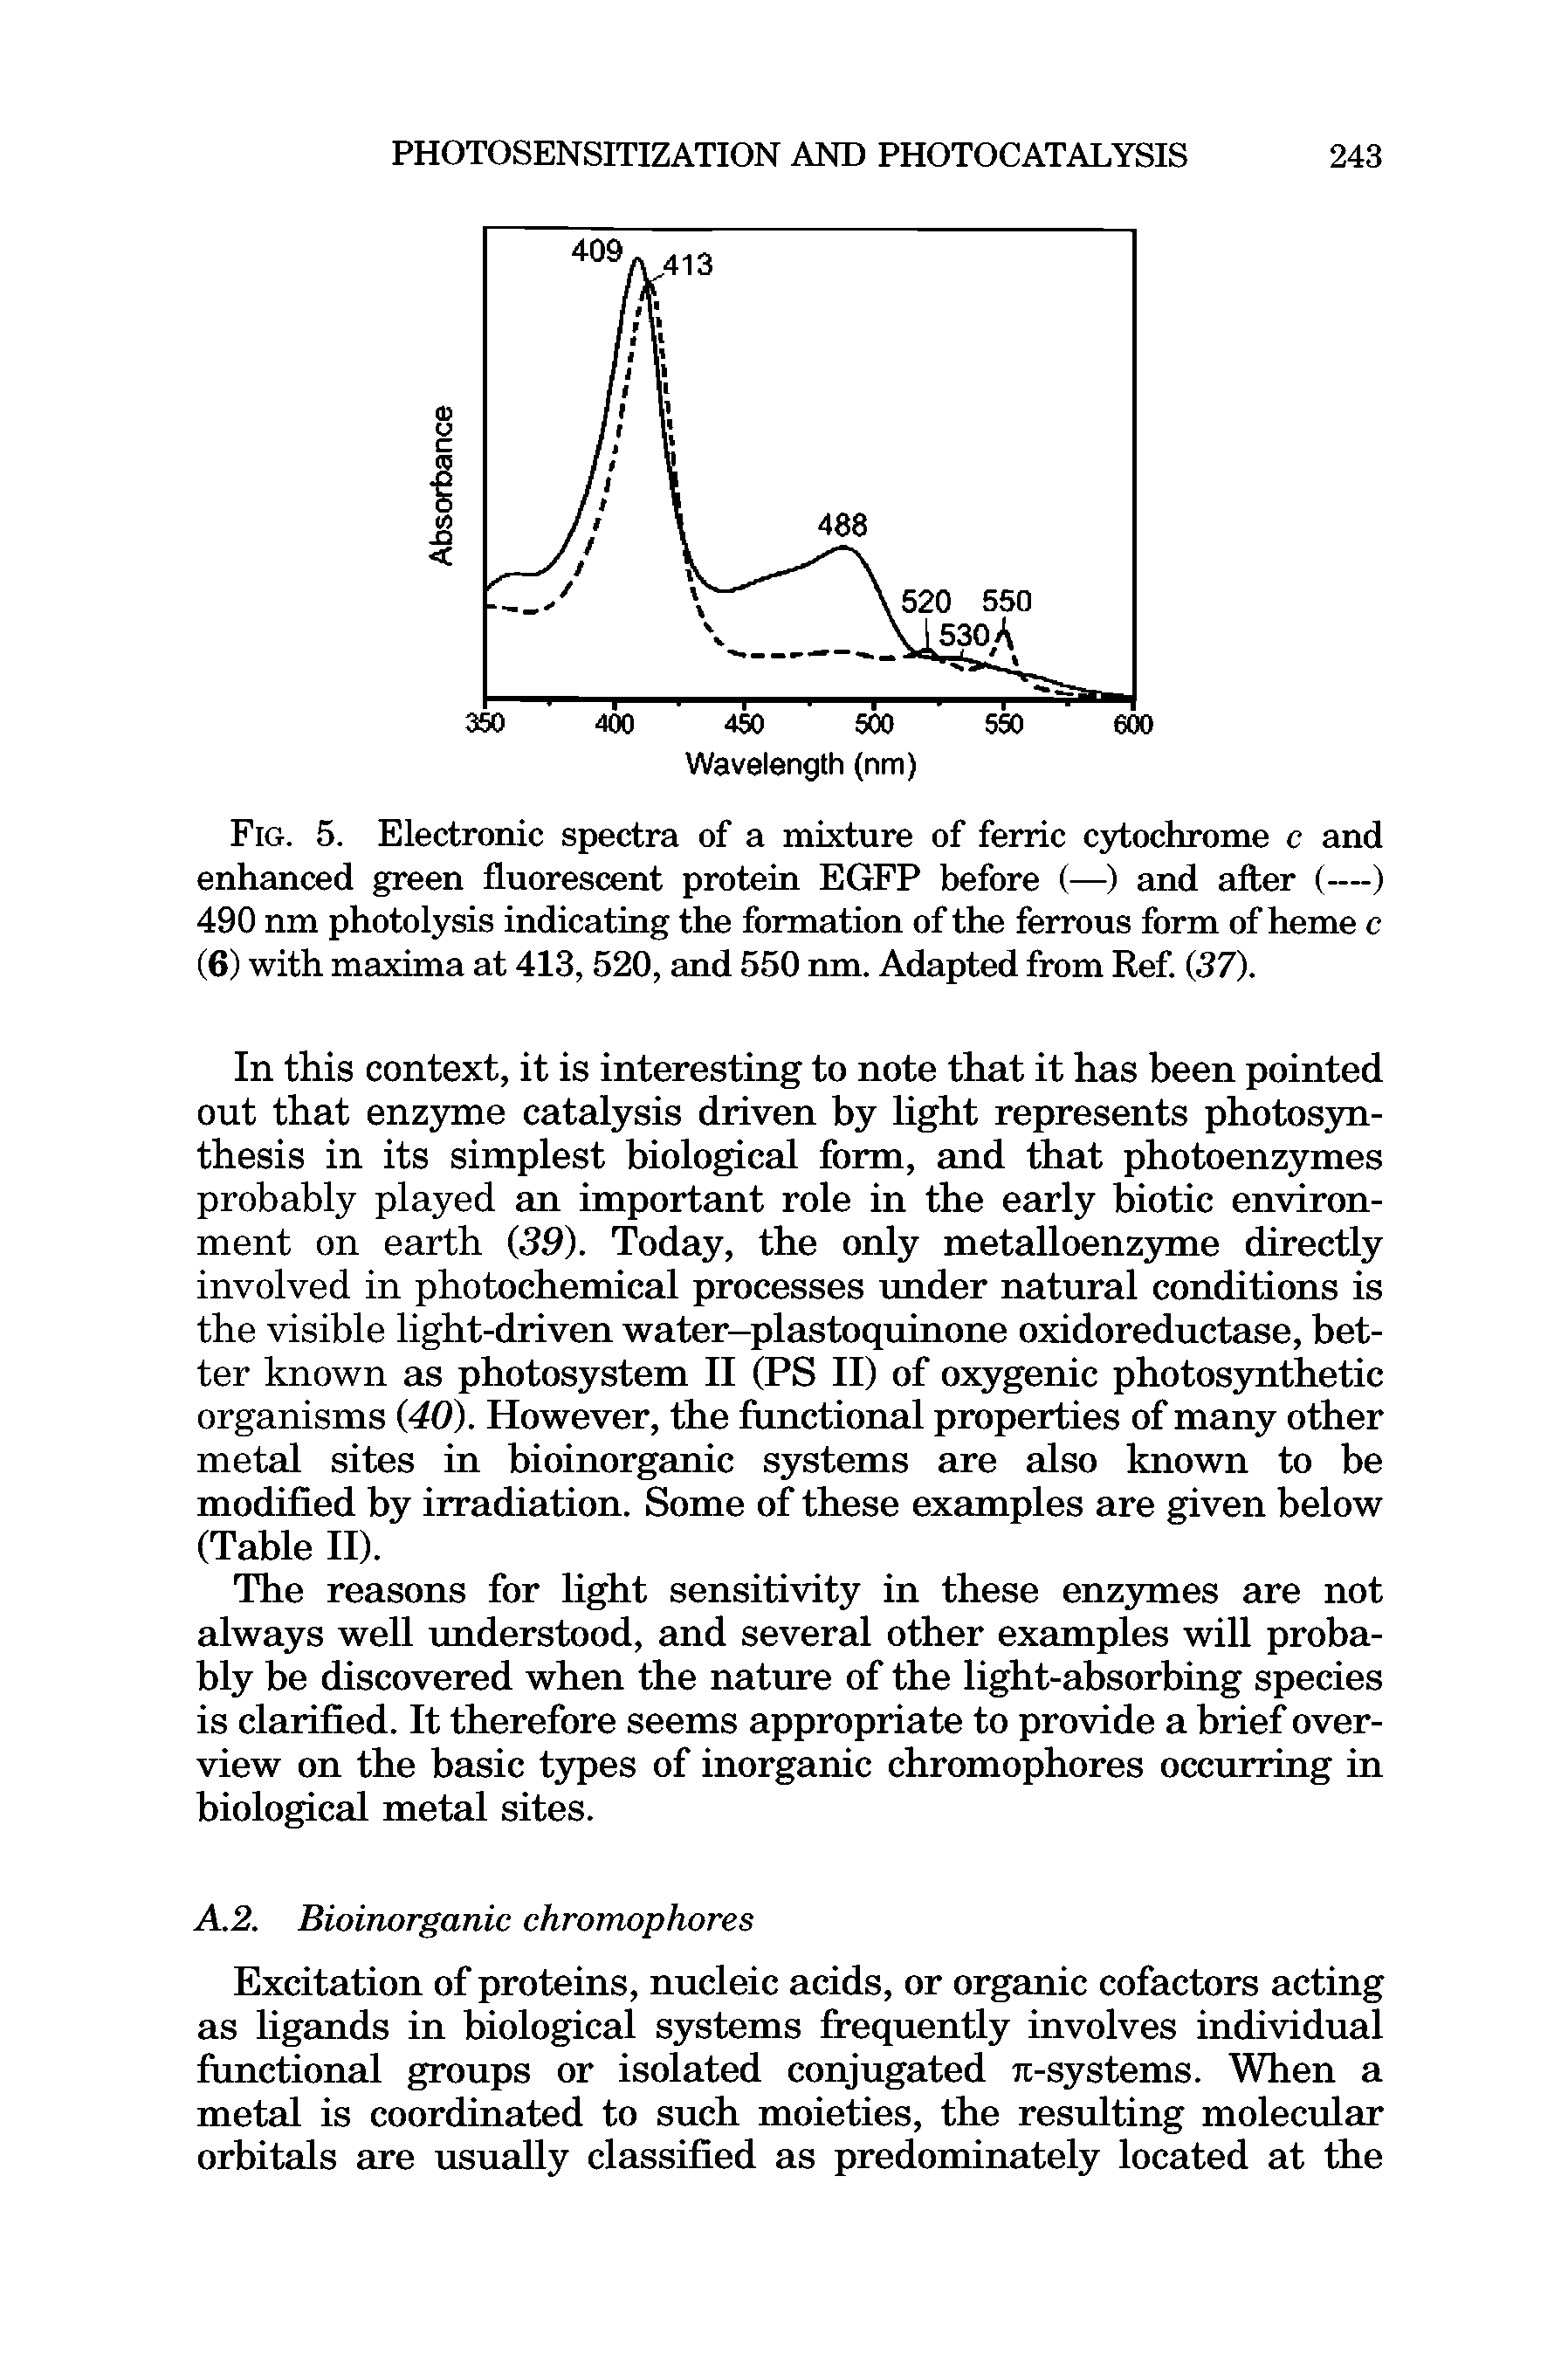 Fig. 5. Electronic spectra of a mixture of ferric cytochrome c and enhanced green fluorescent protein EGFP before (—) and after (—) 490 nm photolysis indicating the formation of the ferrous form of heme c (6) with maxima at 413, 520, and 550 nm. Adapted from Ref (37).